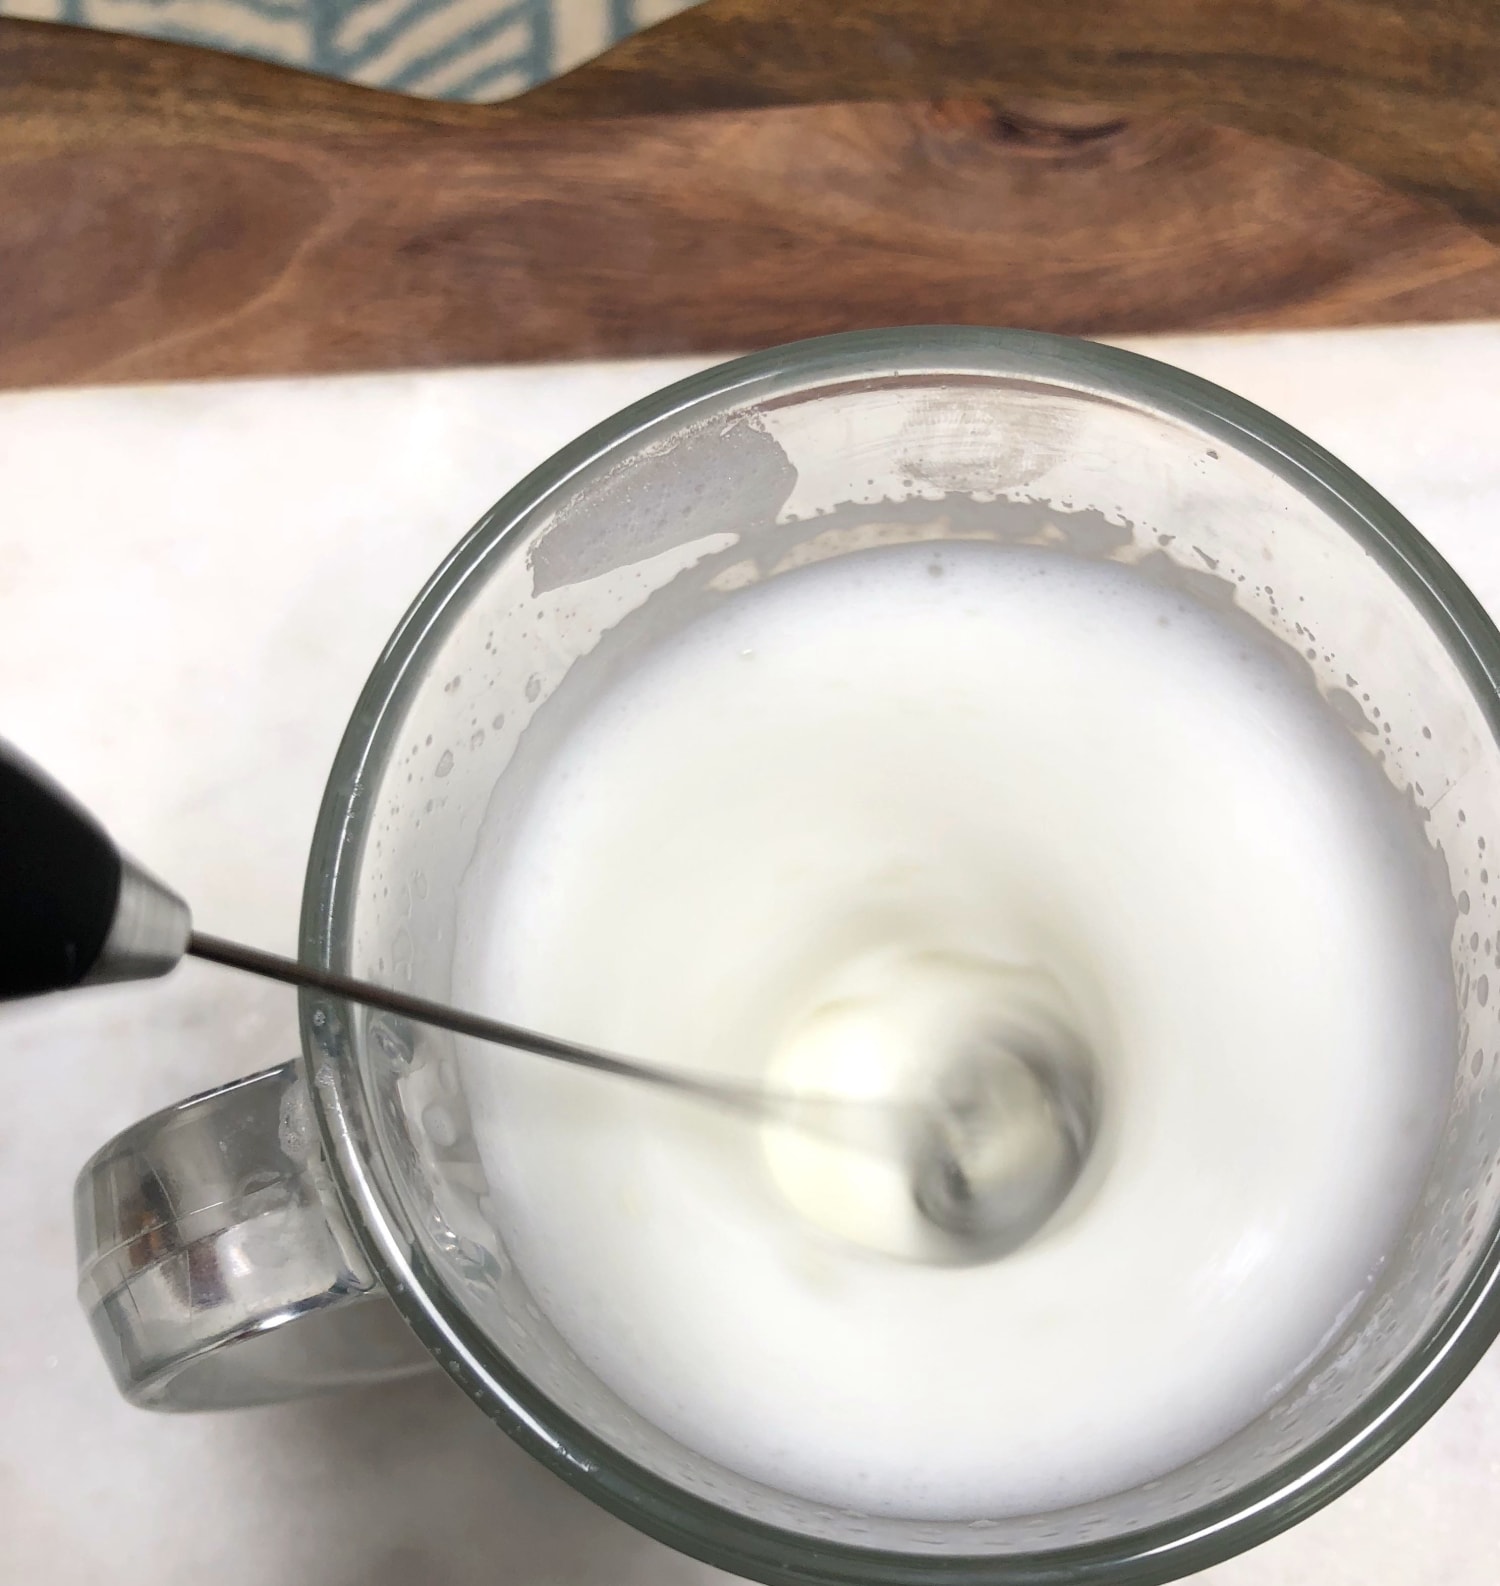 How to froth milk at home: The best cheap milk frother you can buy